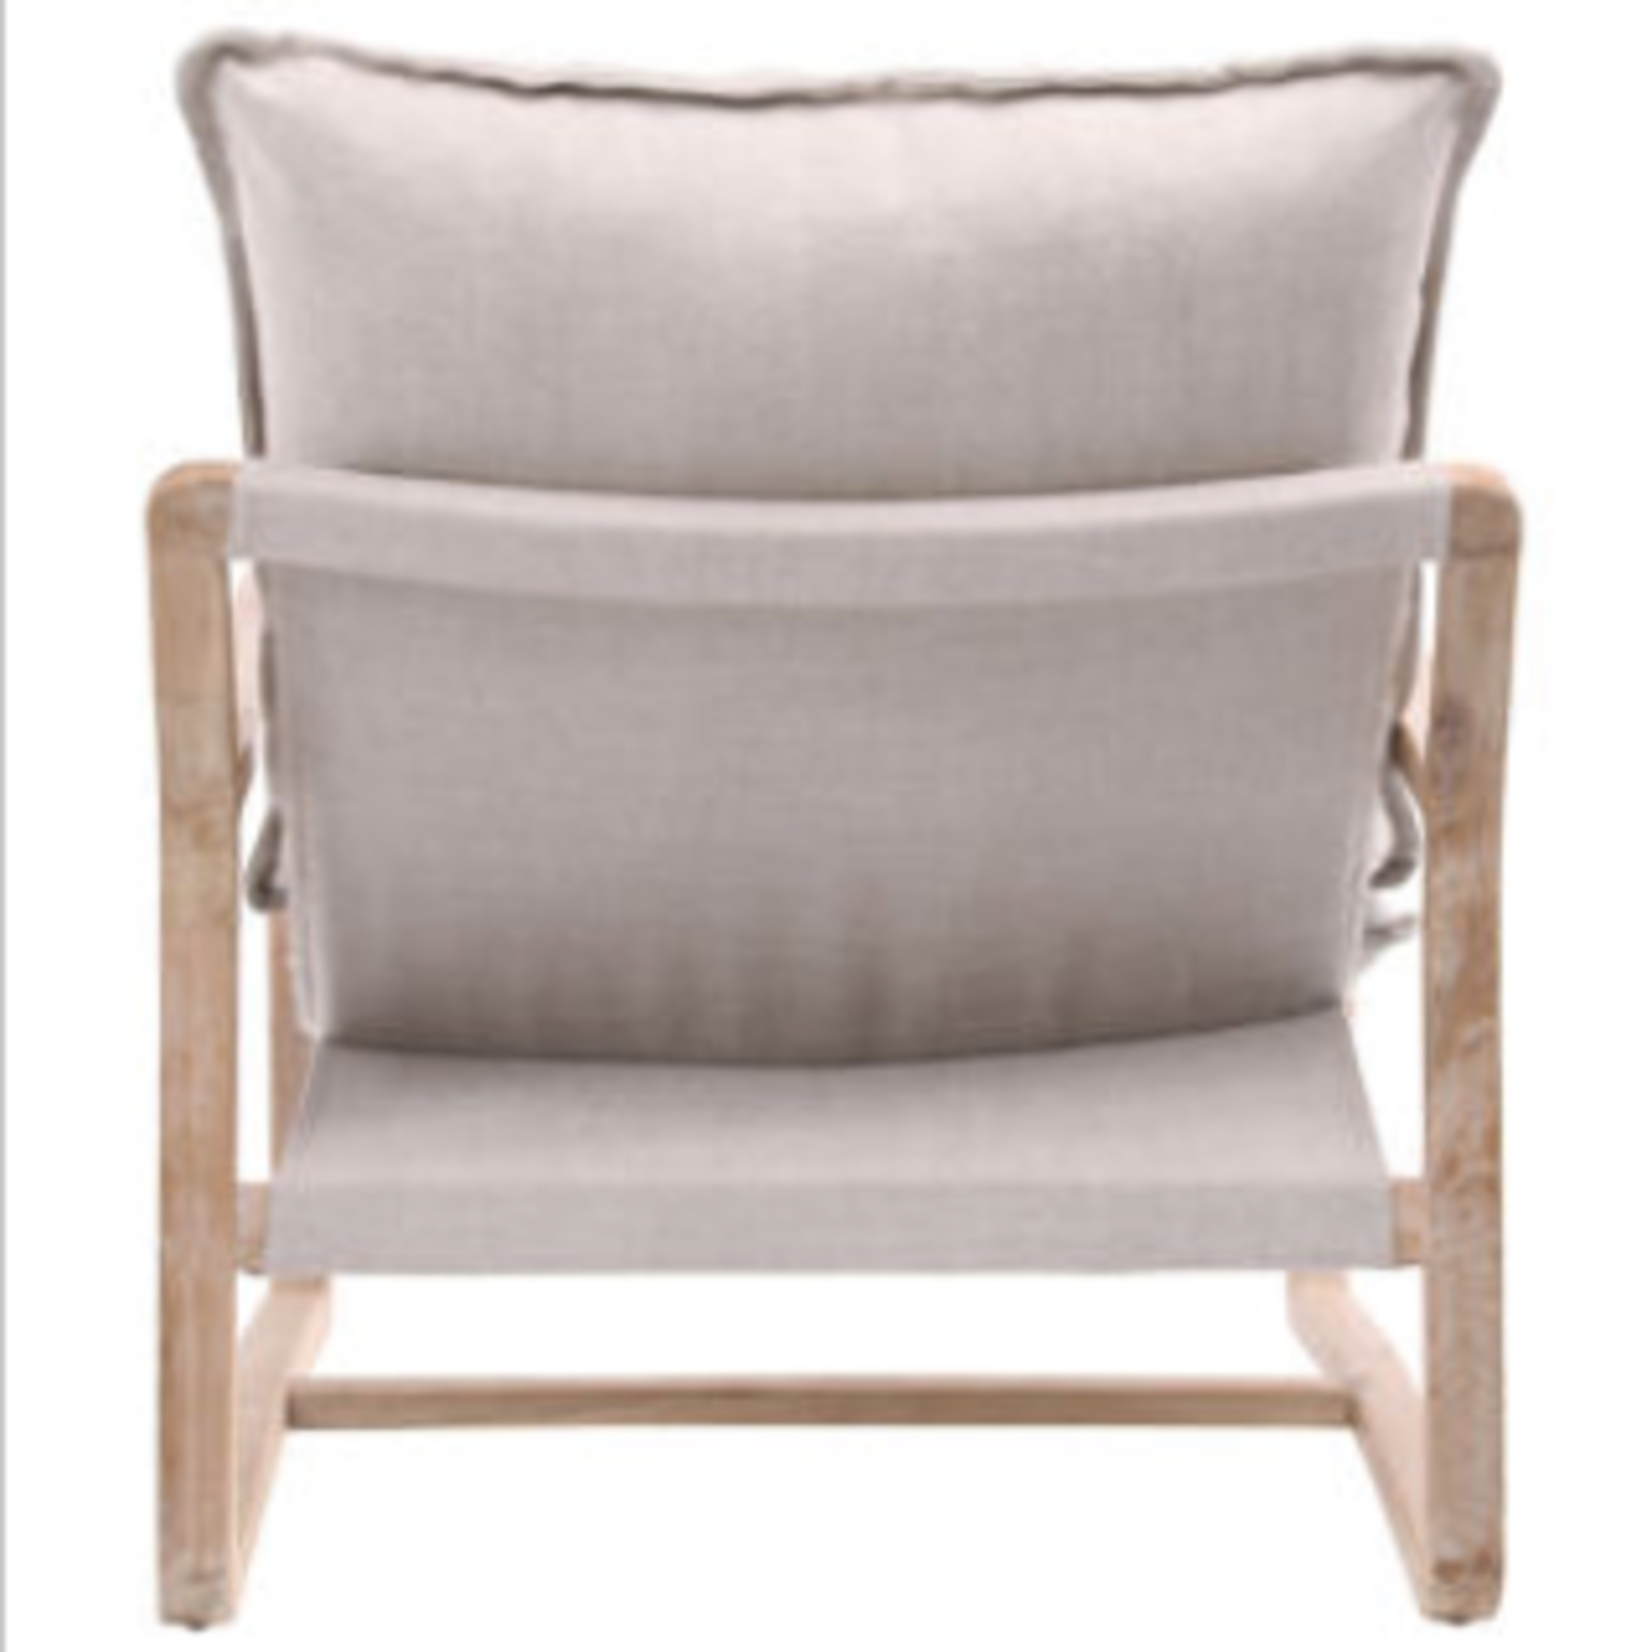 Outside The Box Gabe Oak Wood Frame With Beige Performance Fabric Occasional Chair